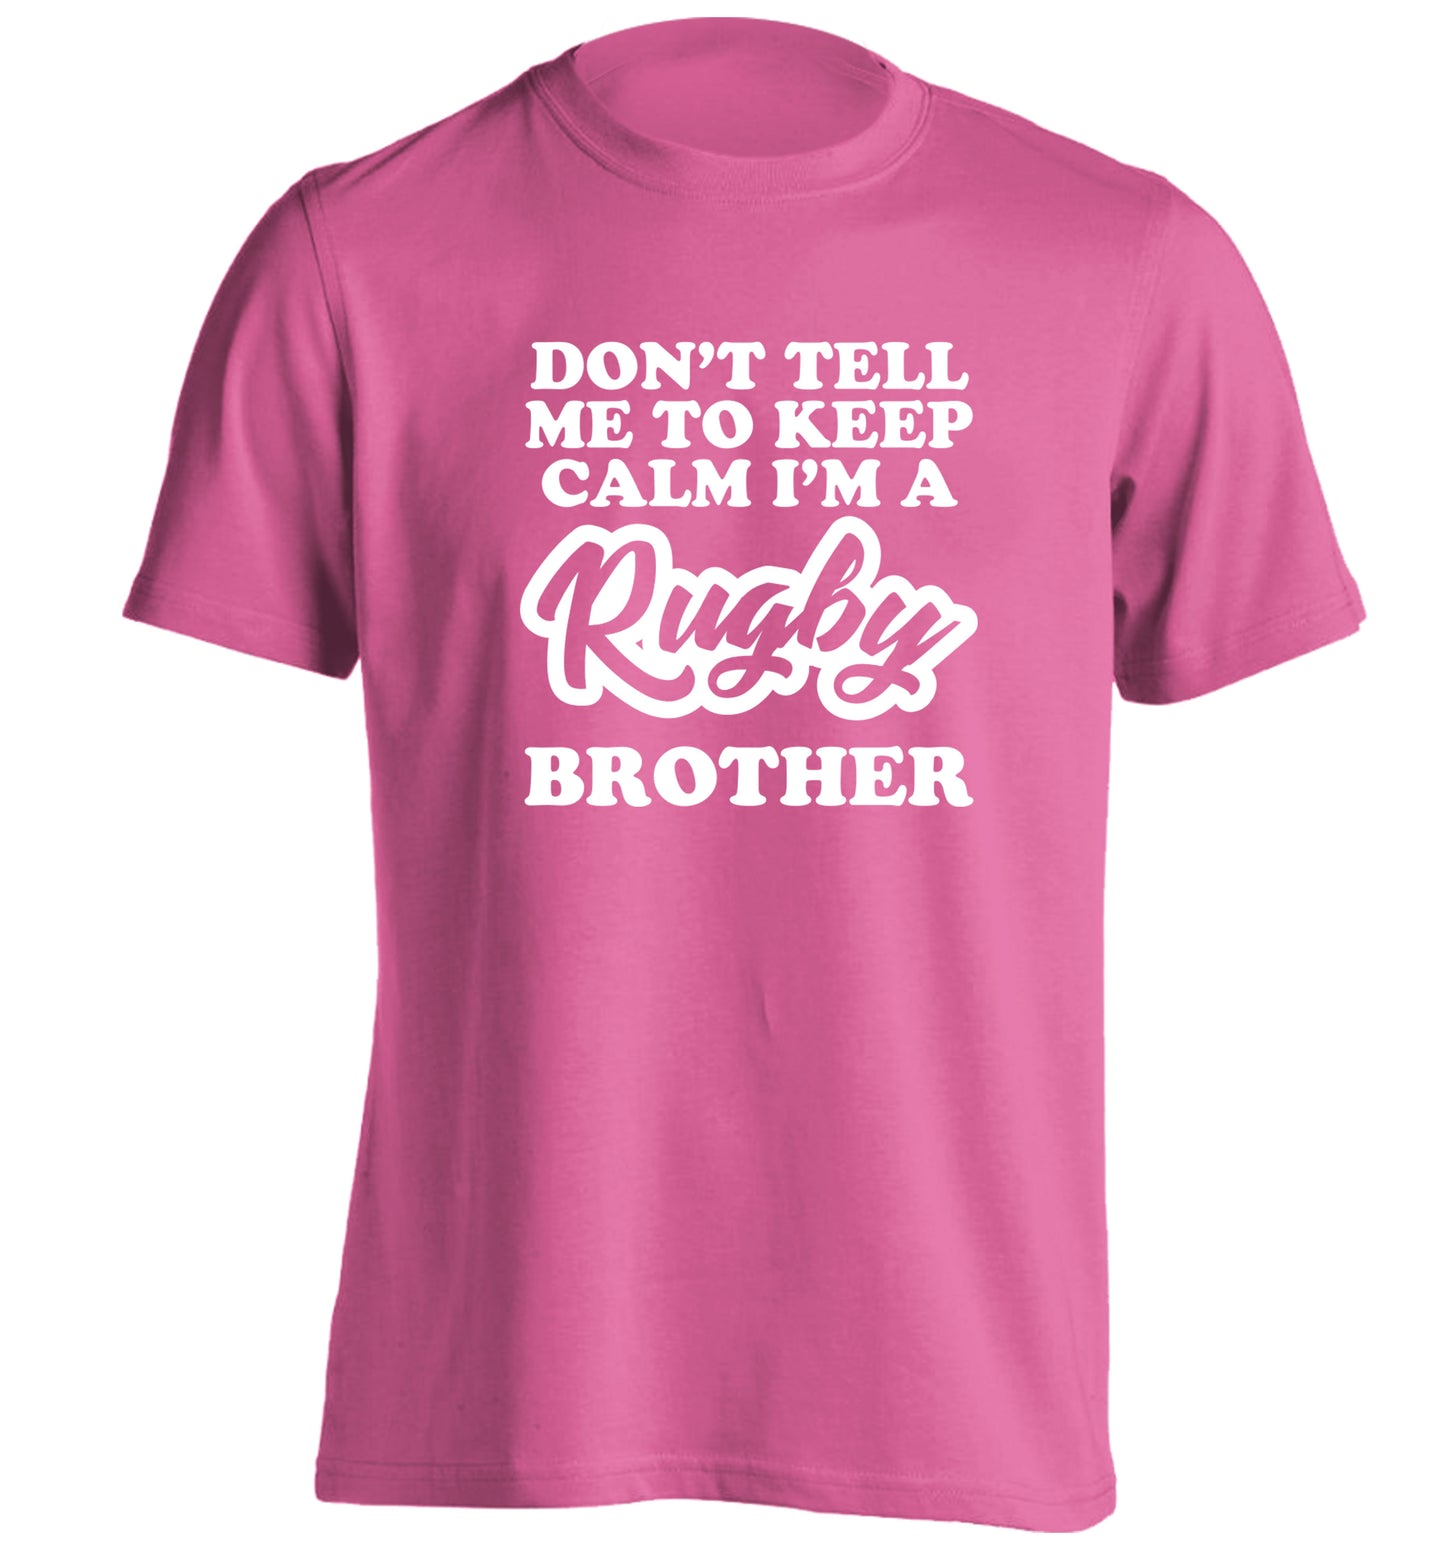 Don't tell me keep calm I'm a rugby brother adults unisex pink Tshirt 2XL